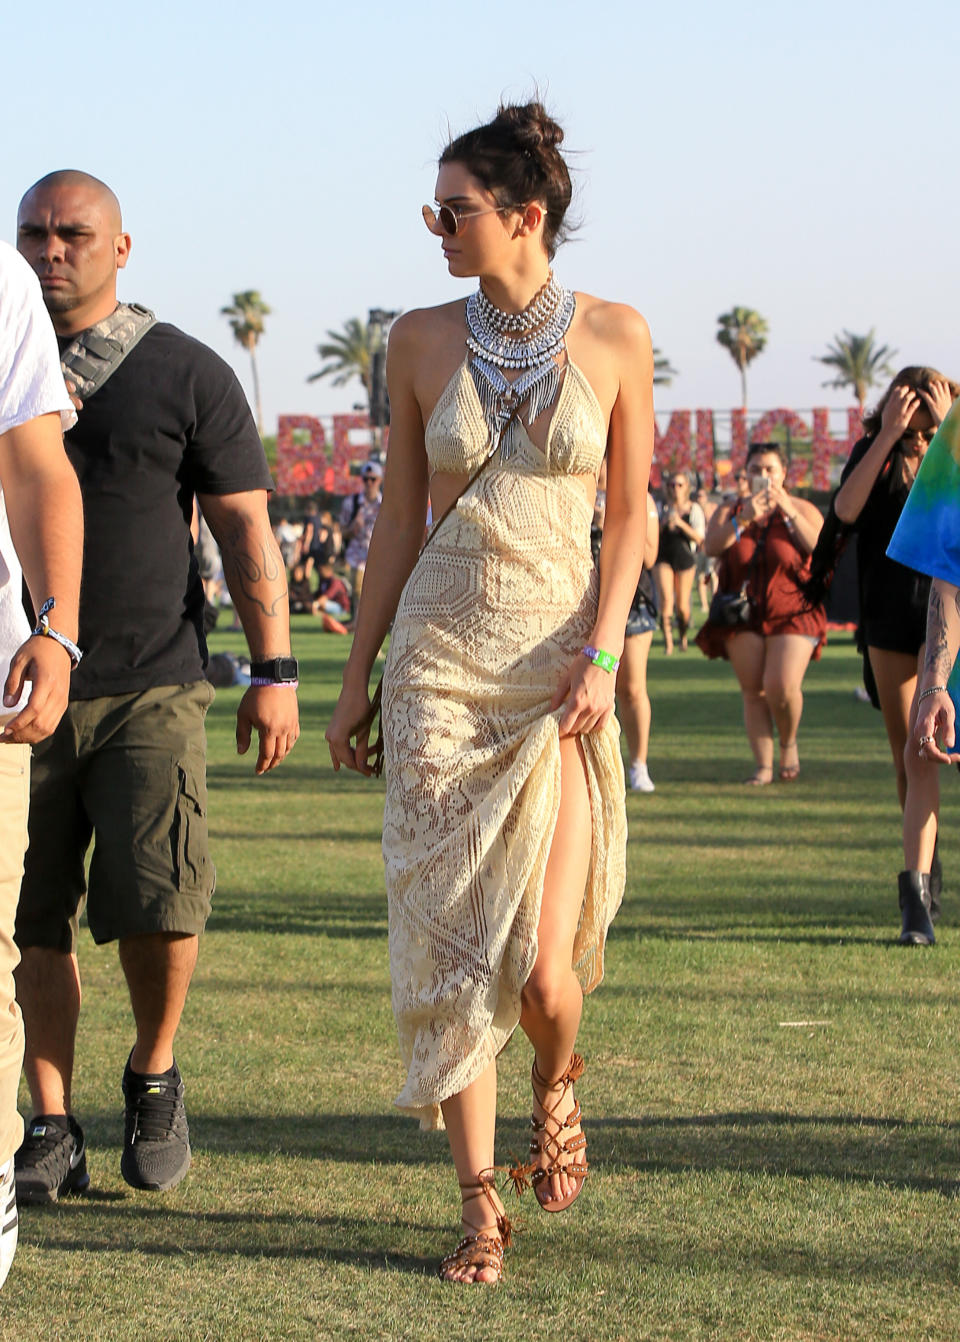 Kendall Jenner making her way through the Coachella Valley Music and Arts Festival in California in April 2016.